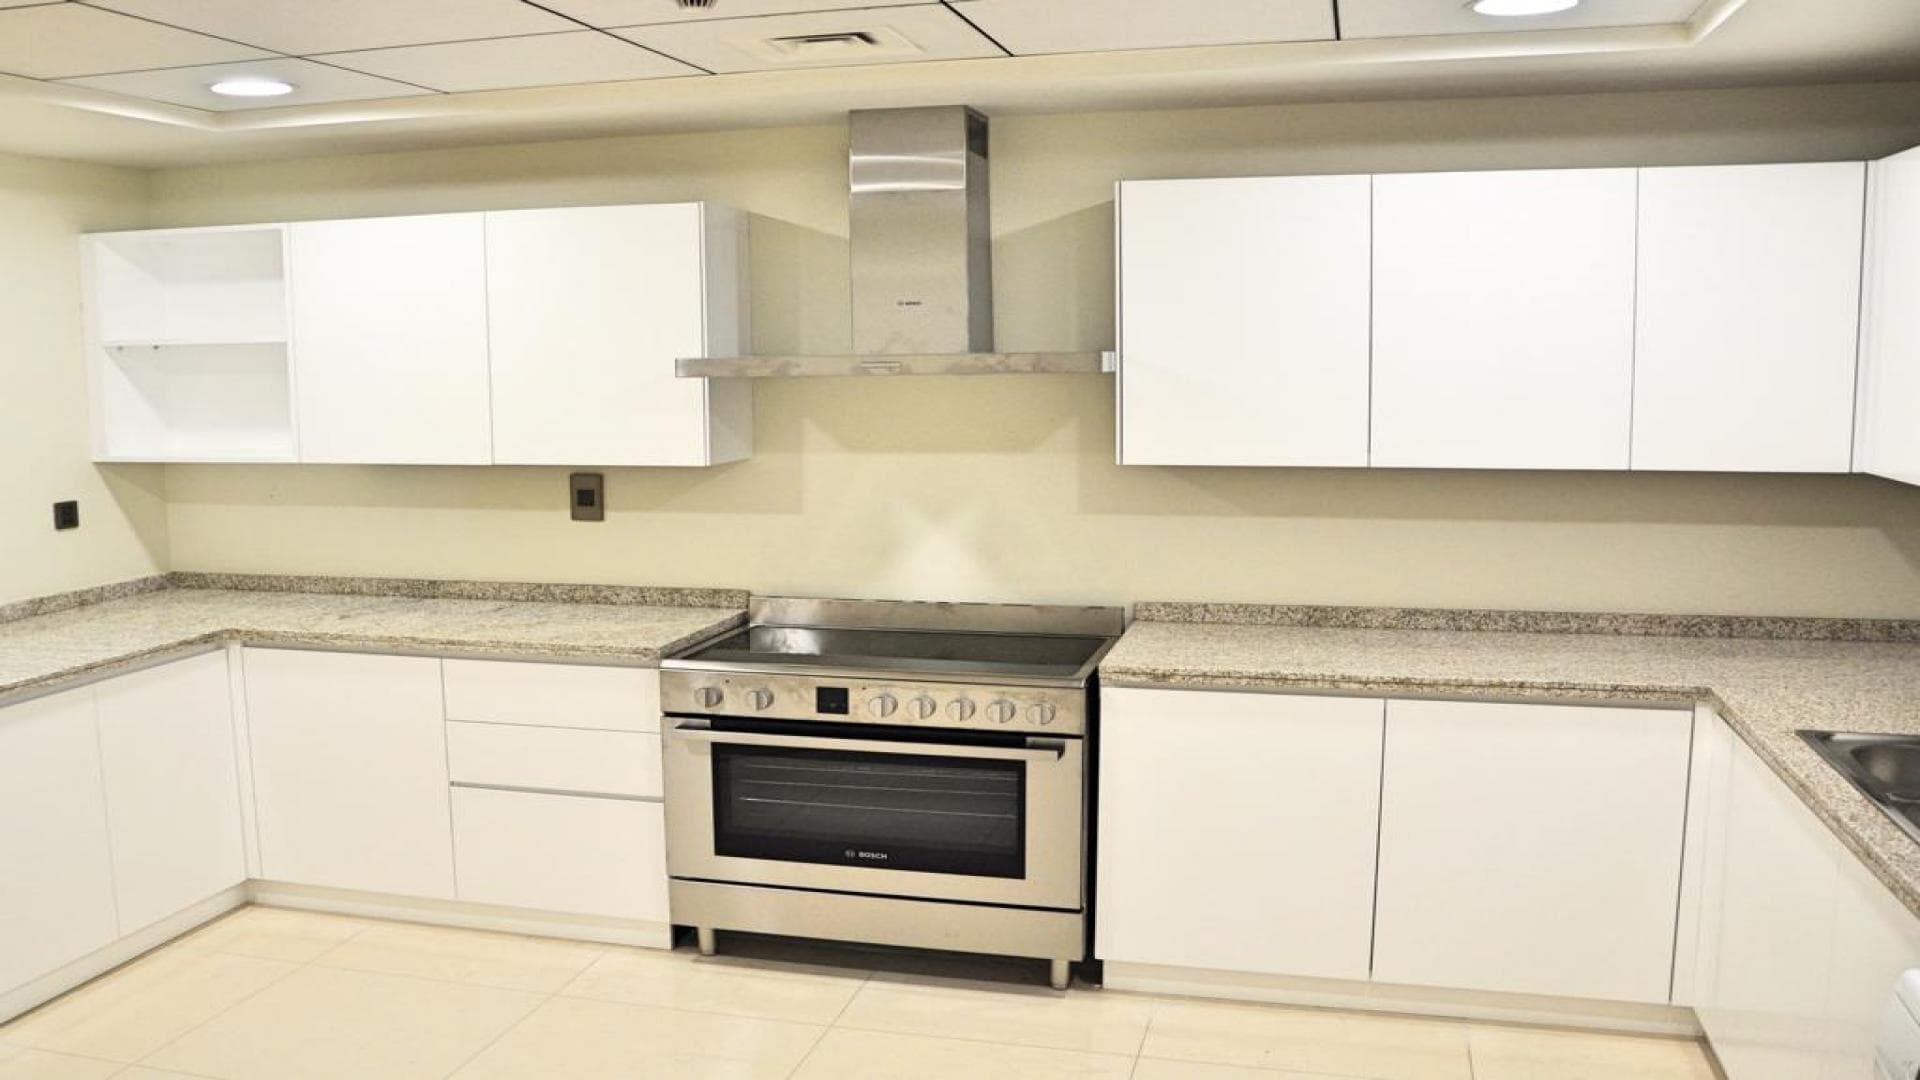 4 Bedroom Apartment For Sale Grand Residence Lp38493 14adaf6e3ddc2500.jpeg